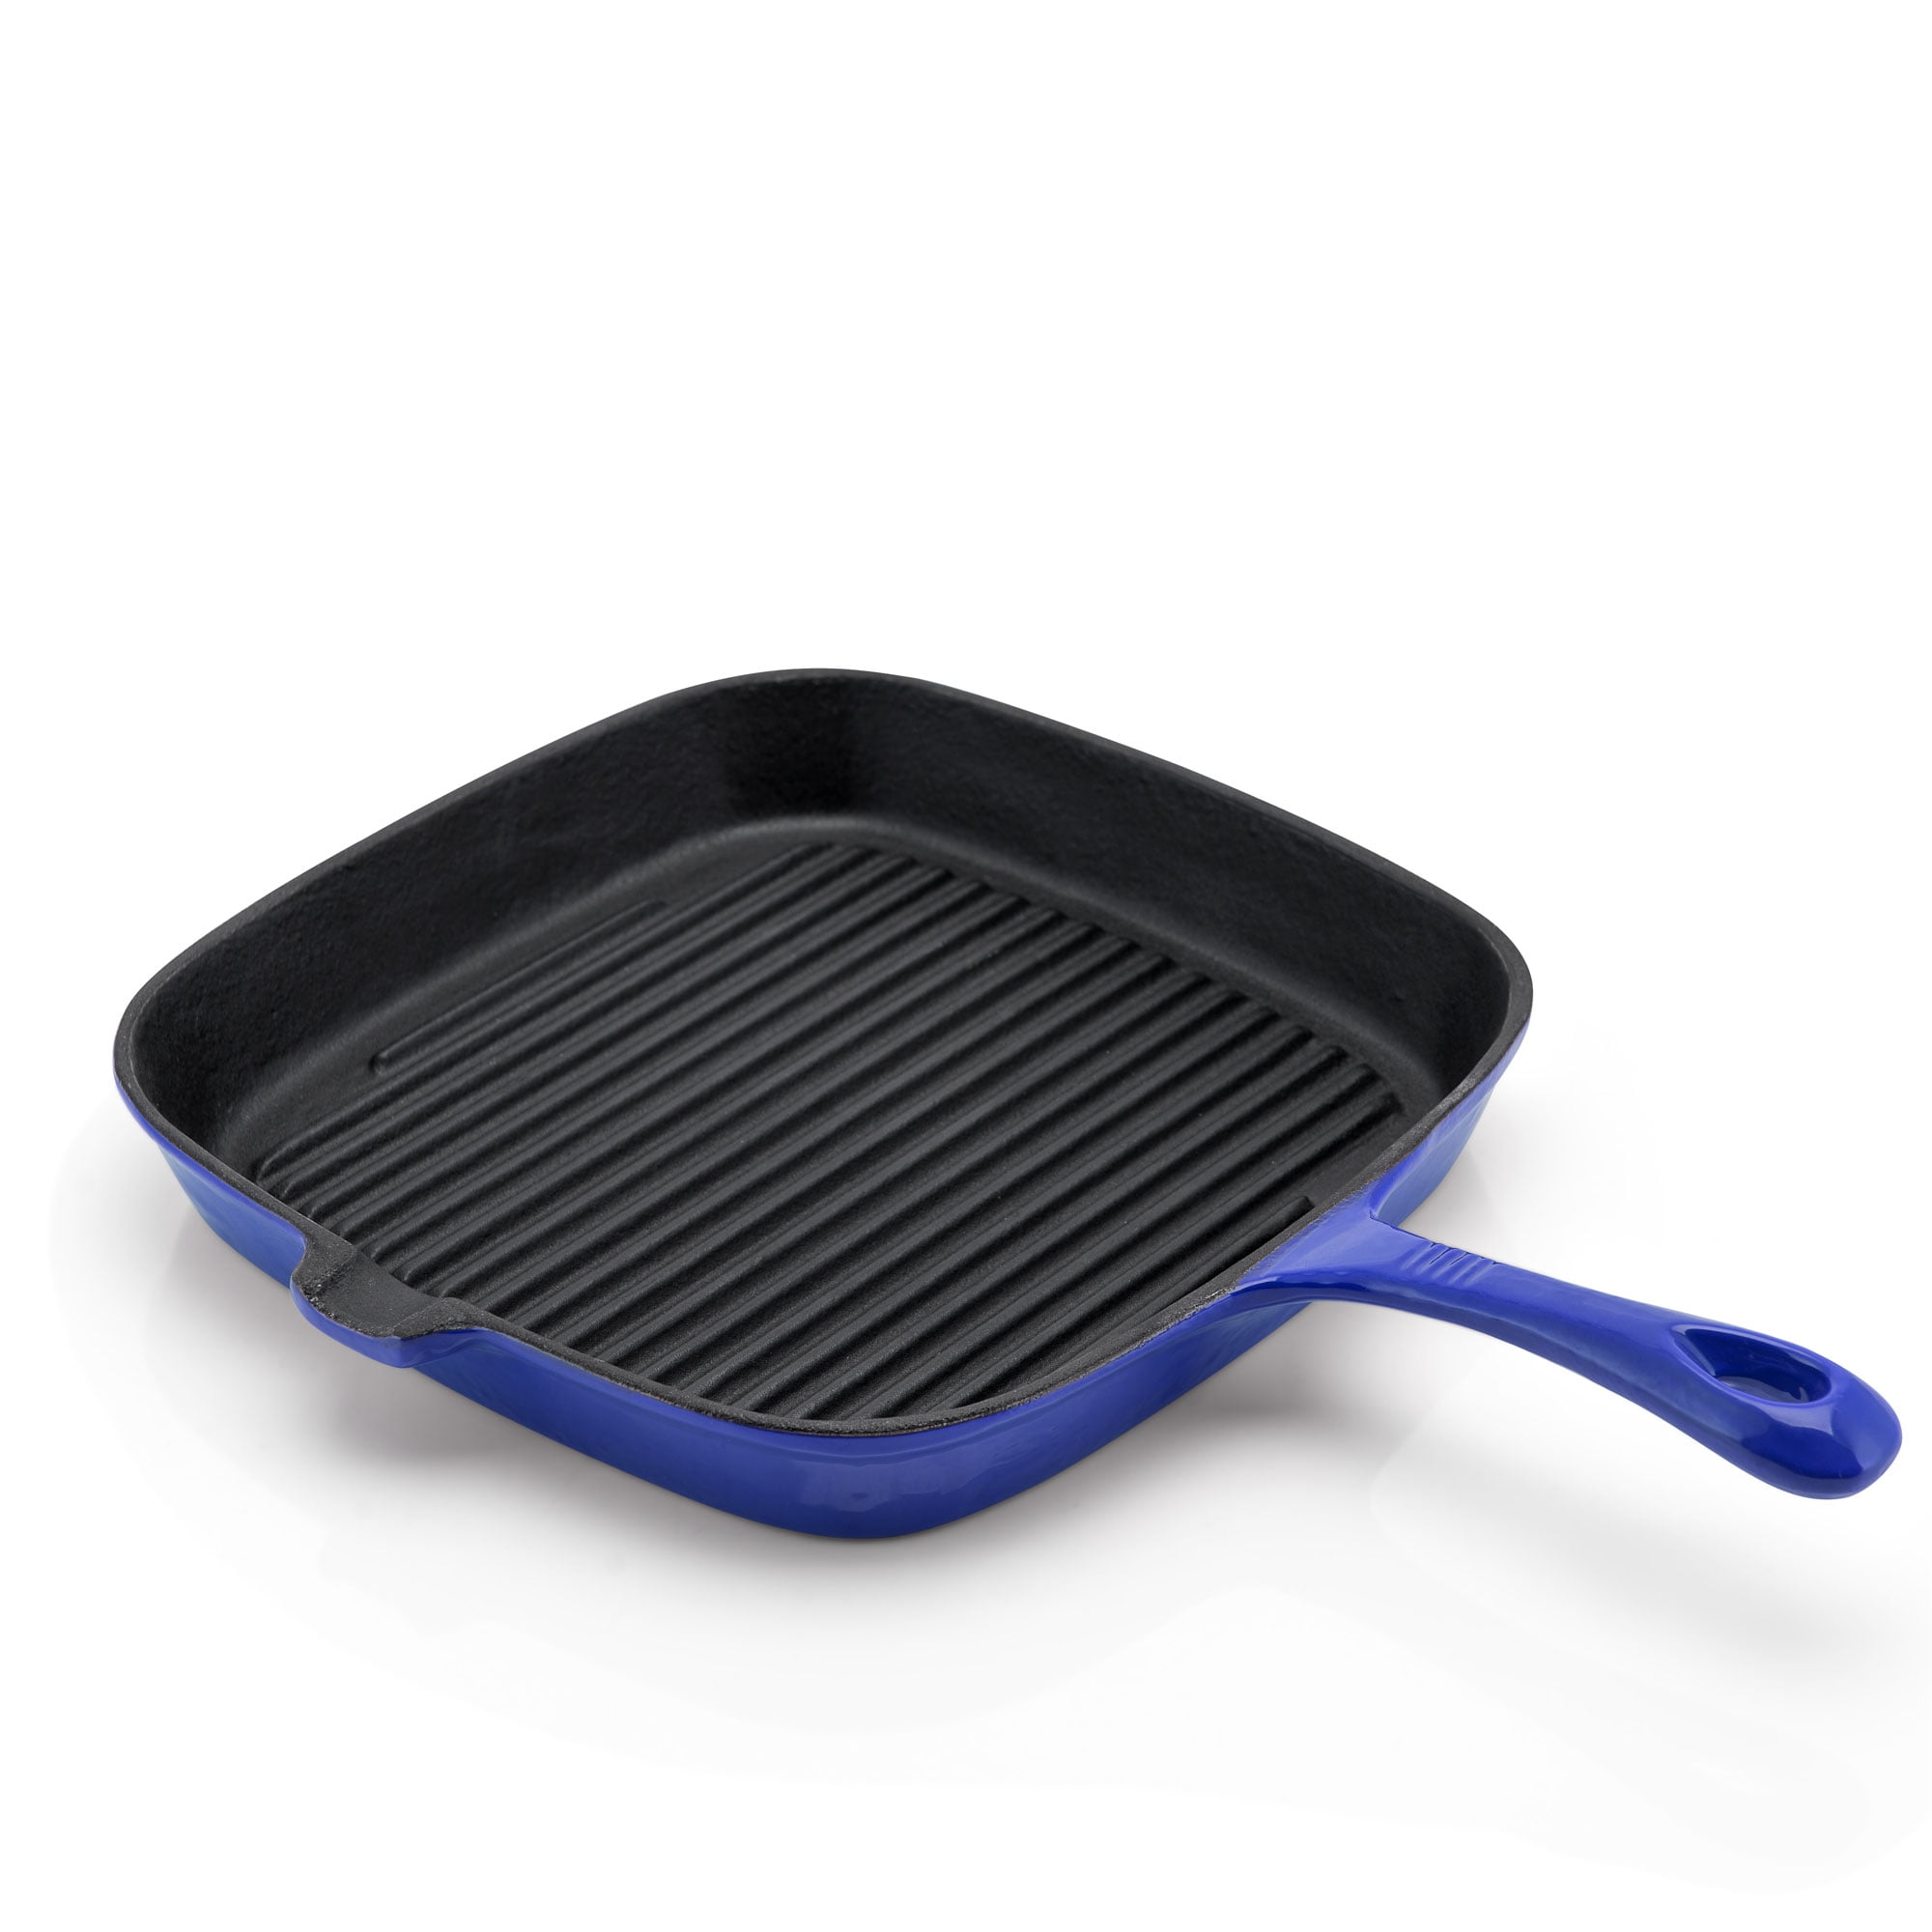 Lodge Cast Iron Caribbean Blue Enameled Grill Pan 10.5 Square Clean